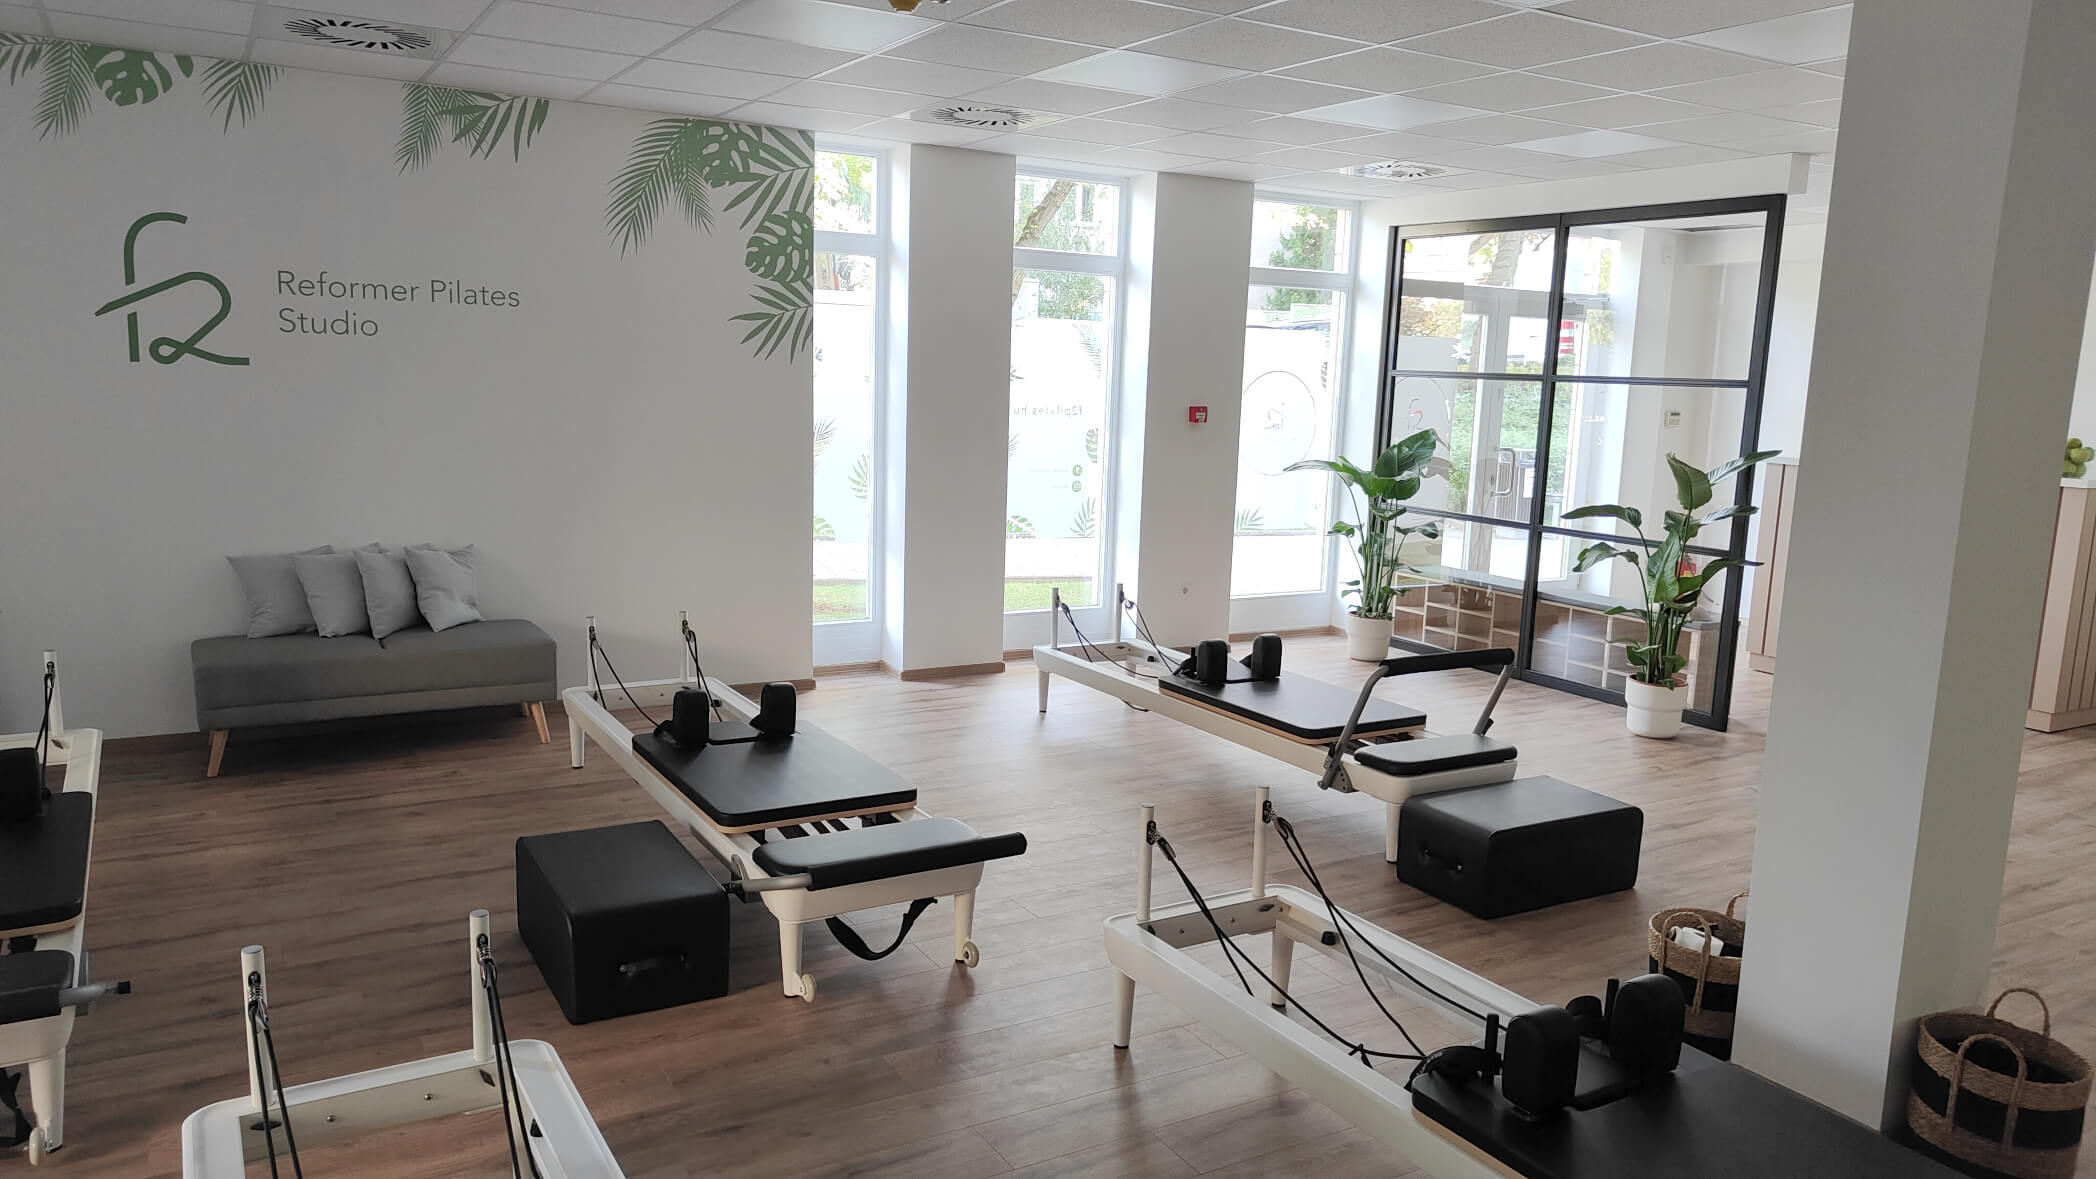 F2 Reformer Pilates Studio to Bring New Kind of Workout to Budapest